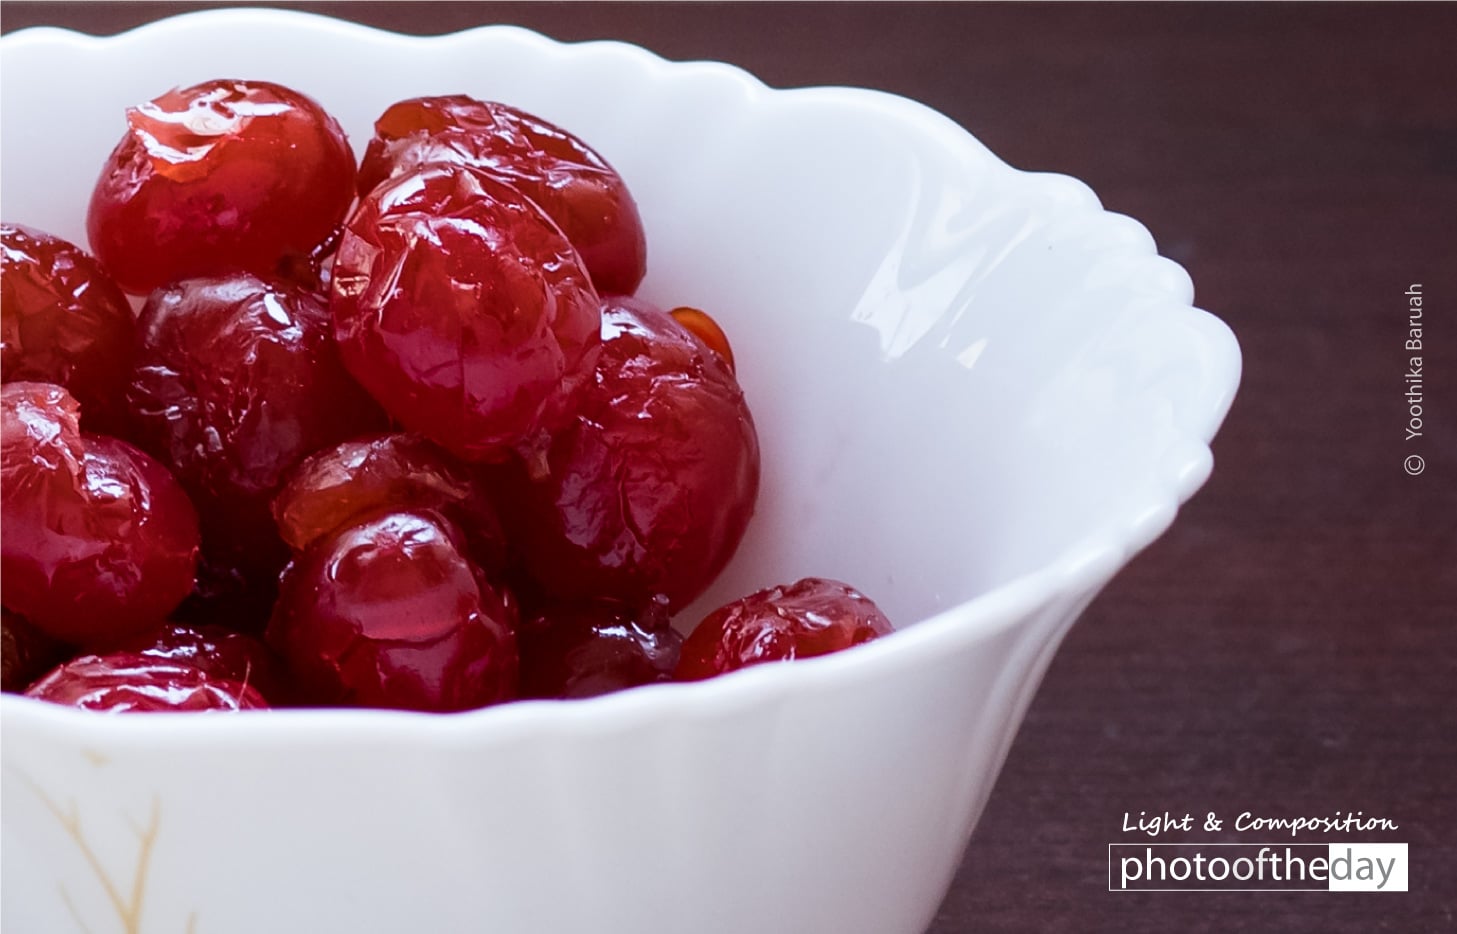 A Bowl Full of Cherry by Yoothika Baruah